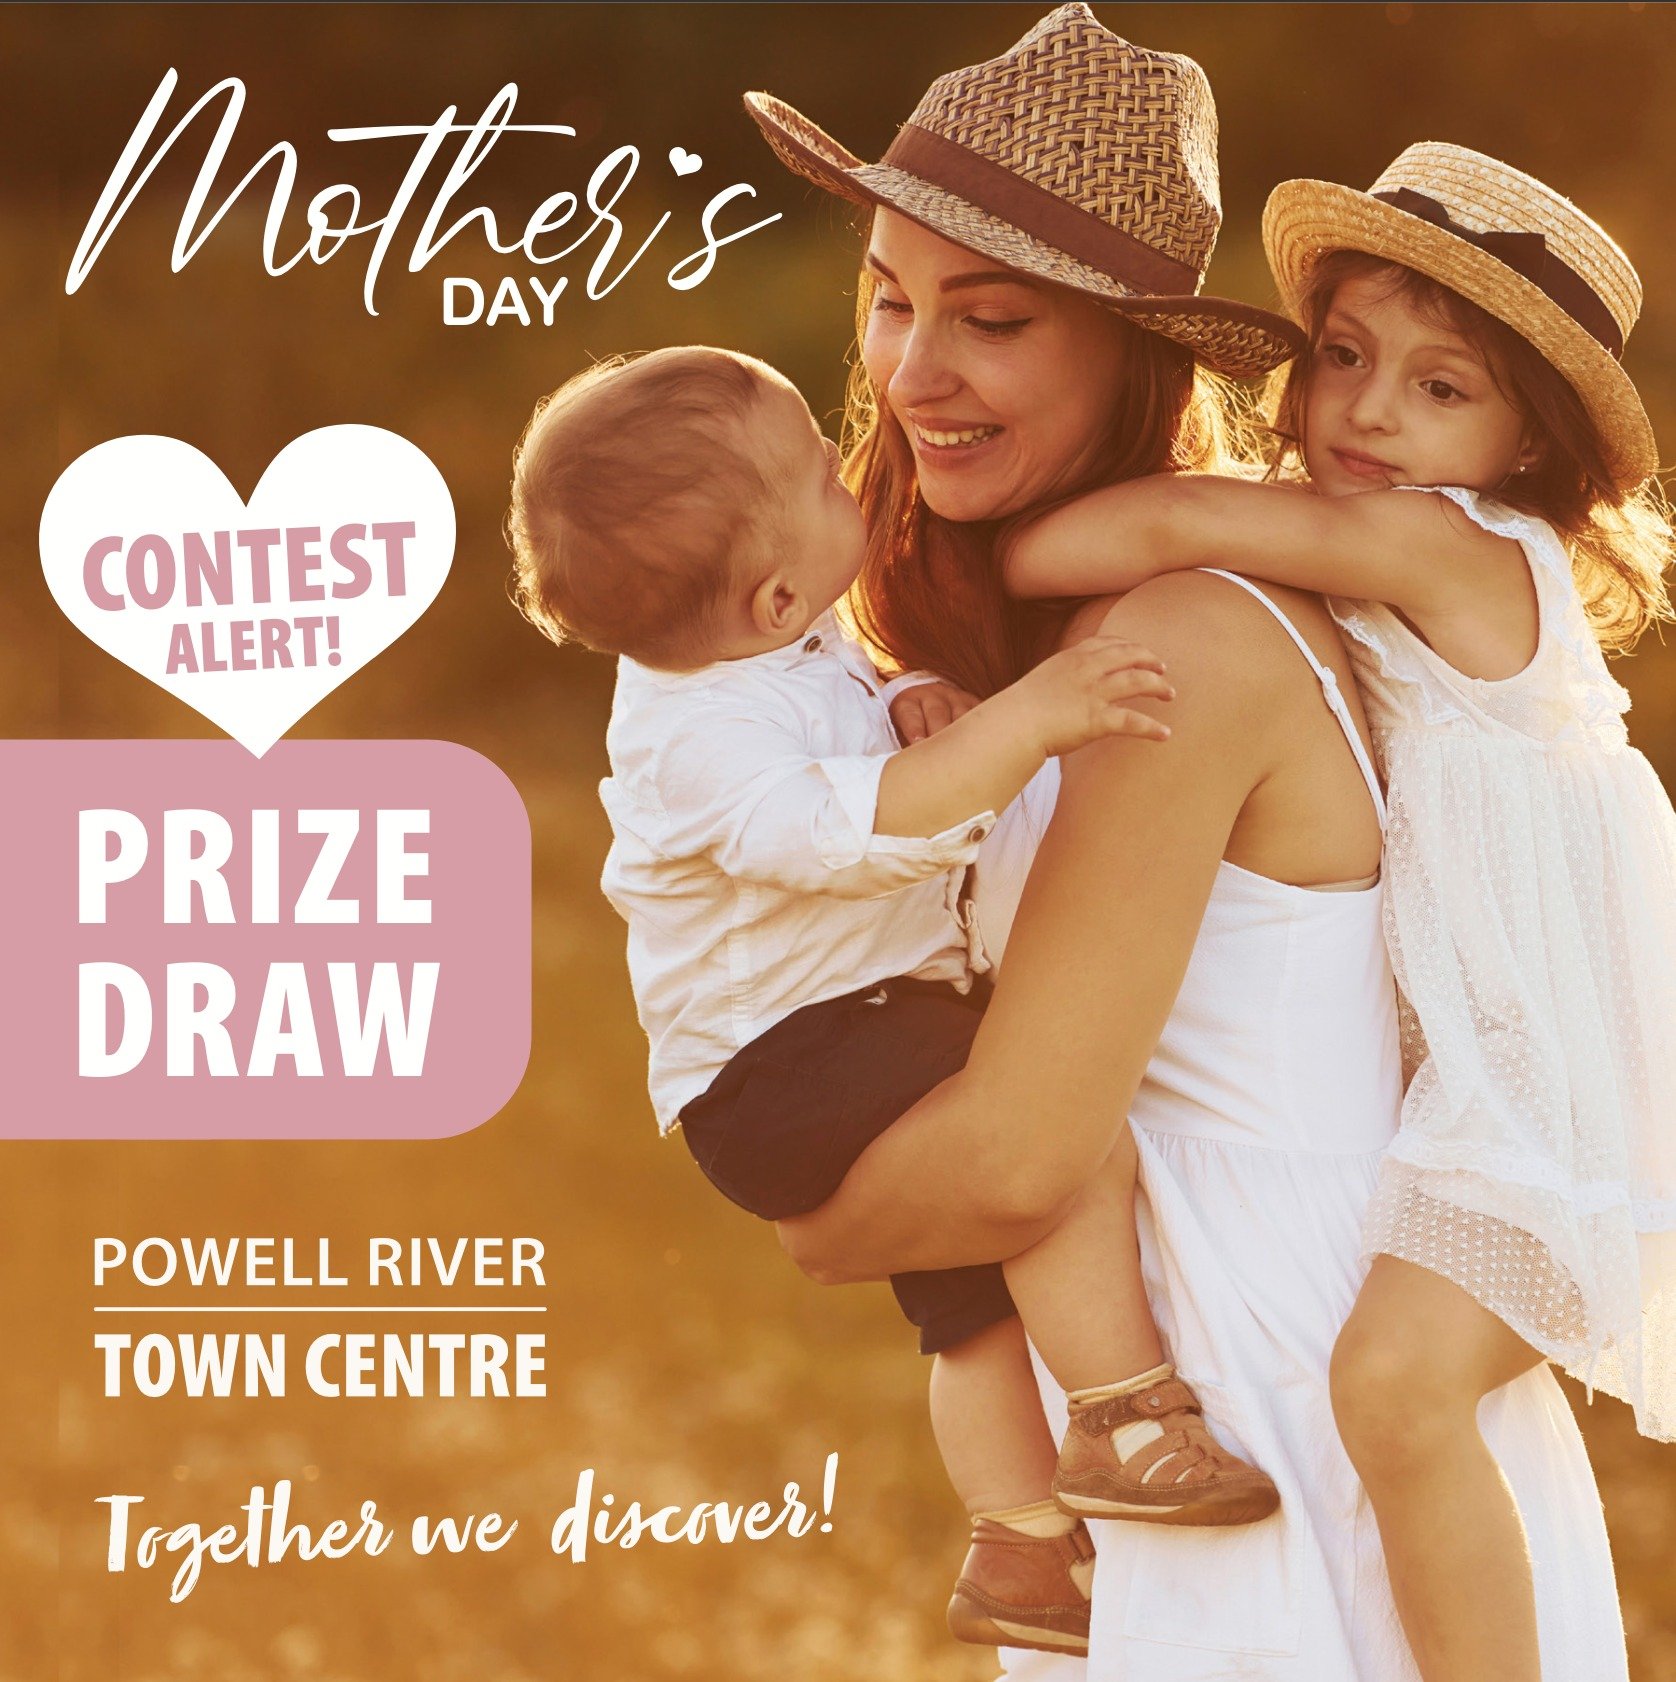 🌟 Last Chance Alert! 🌟 Time is running out to enter our Mother&rsquo;s Day Prize Draw at Powell River Town Centre! Don't miss this opportunity to spoil Mom with a chance to win our luxurious prize package worth $925! Treat her to a 2-night deluxe o